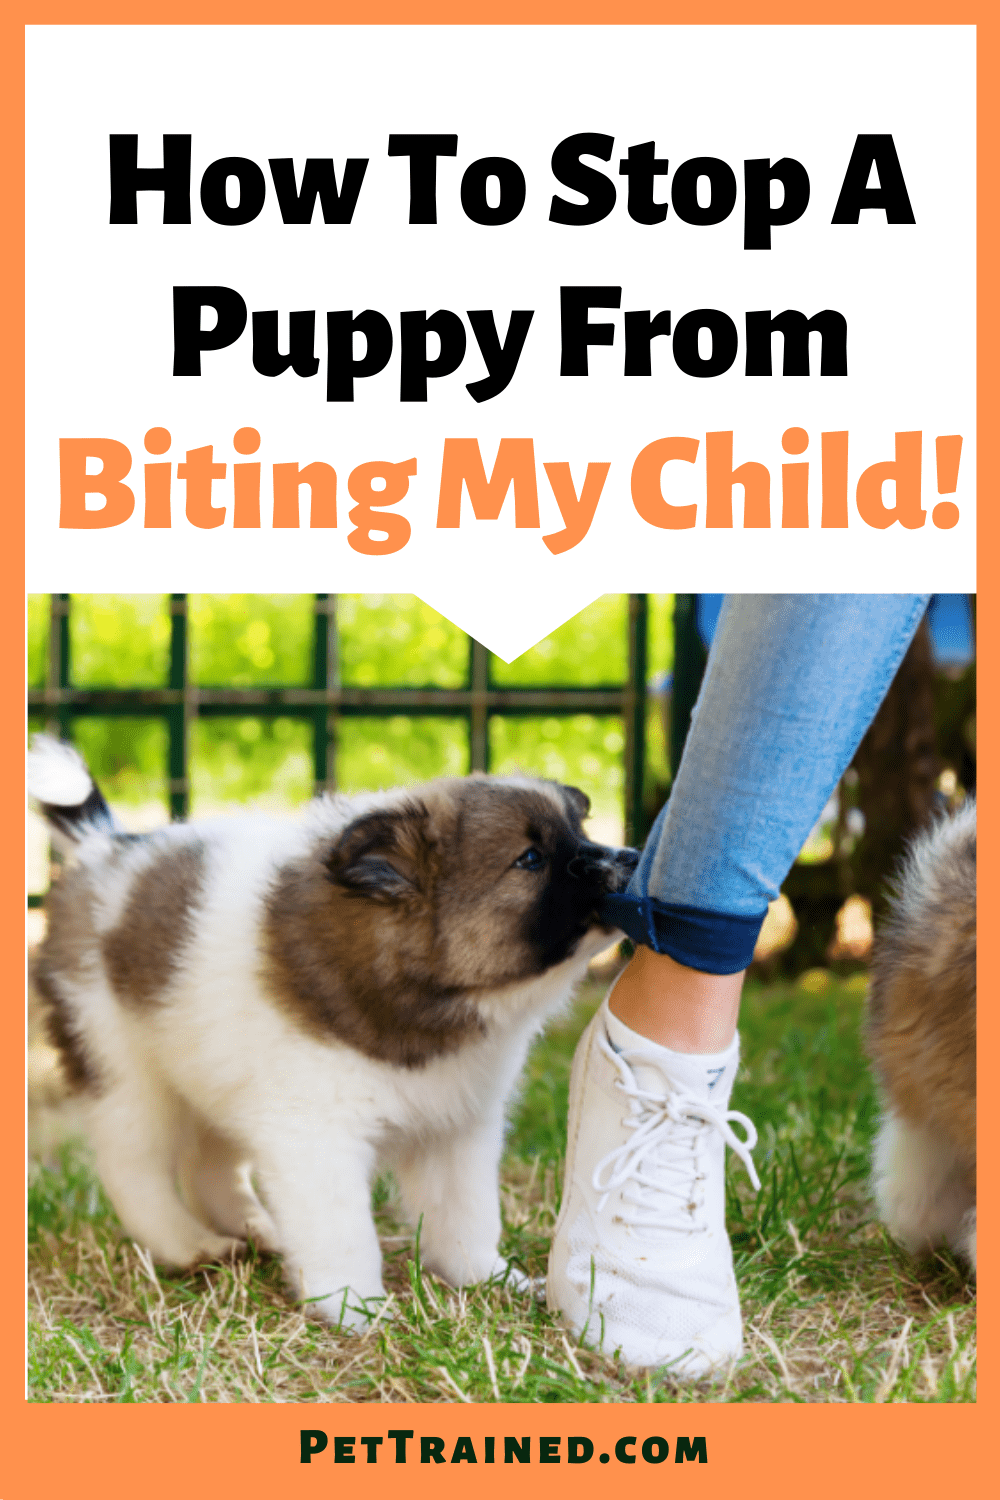 How to stop a puppy from biting my child